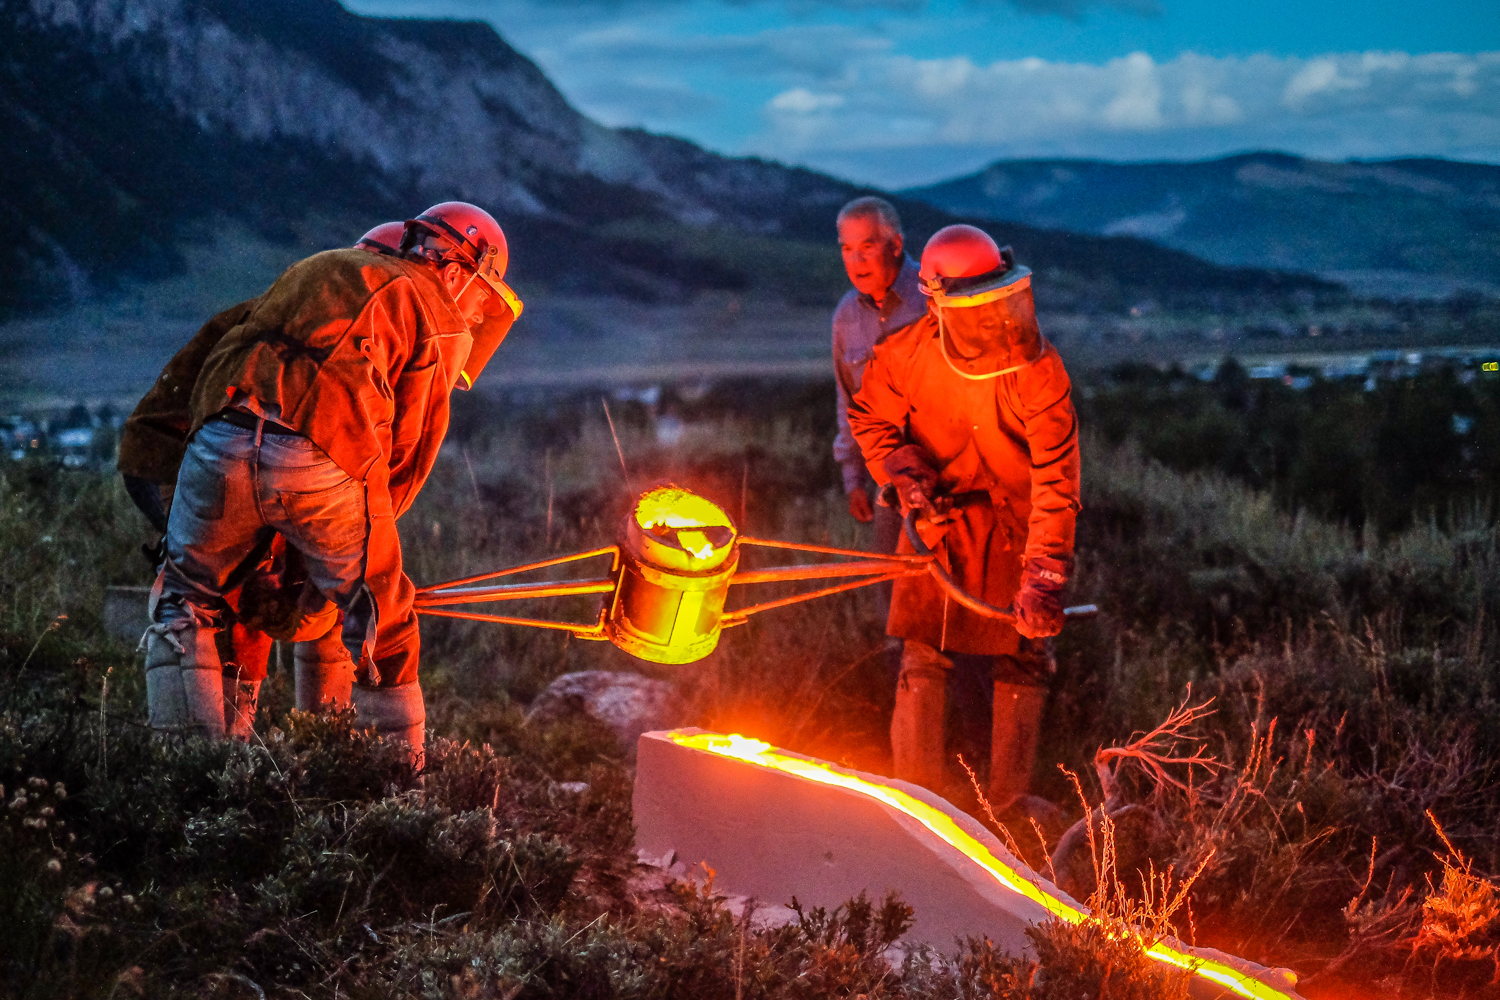 The Crested Butte Community Iron Pour with the Fuji X-T1